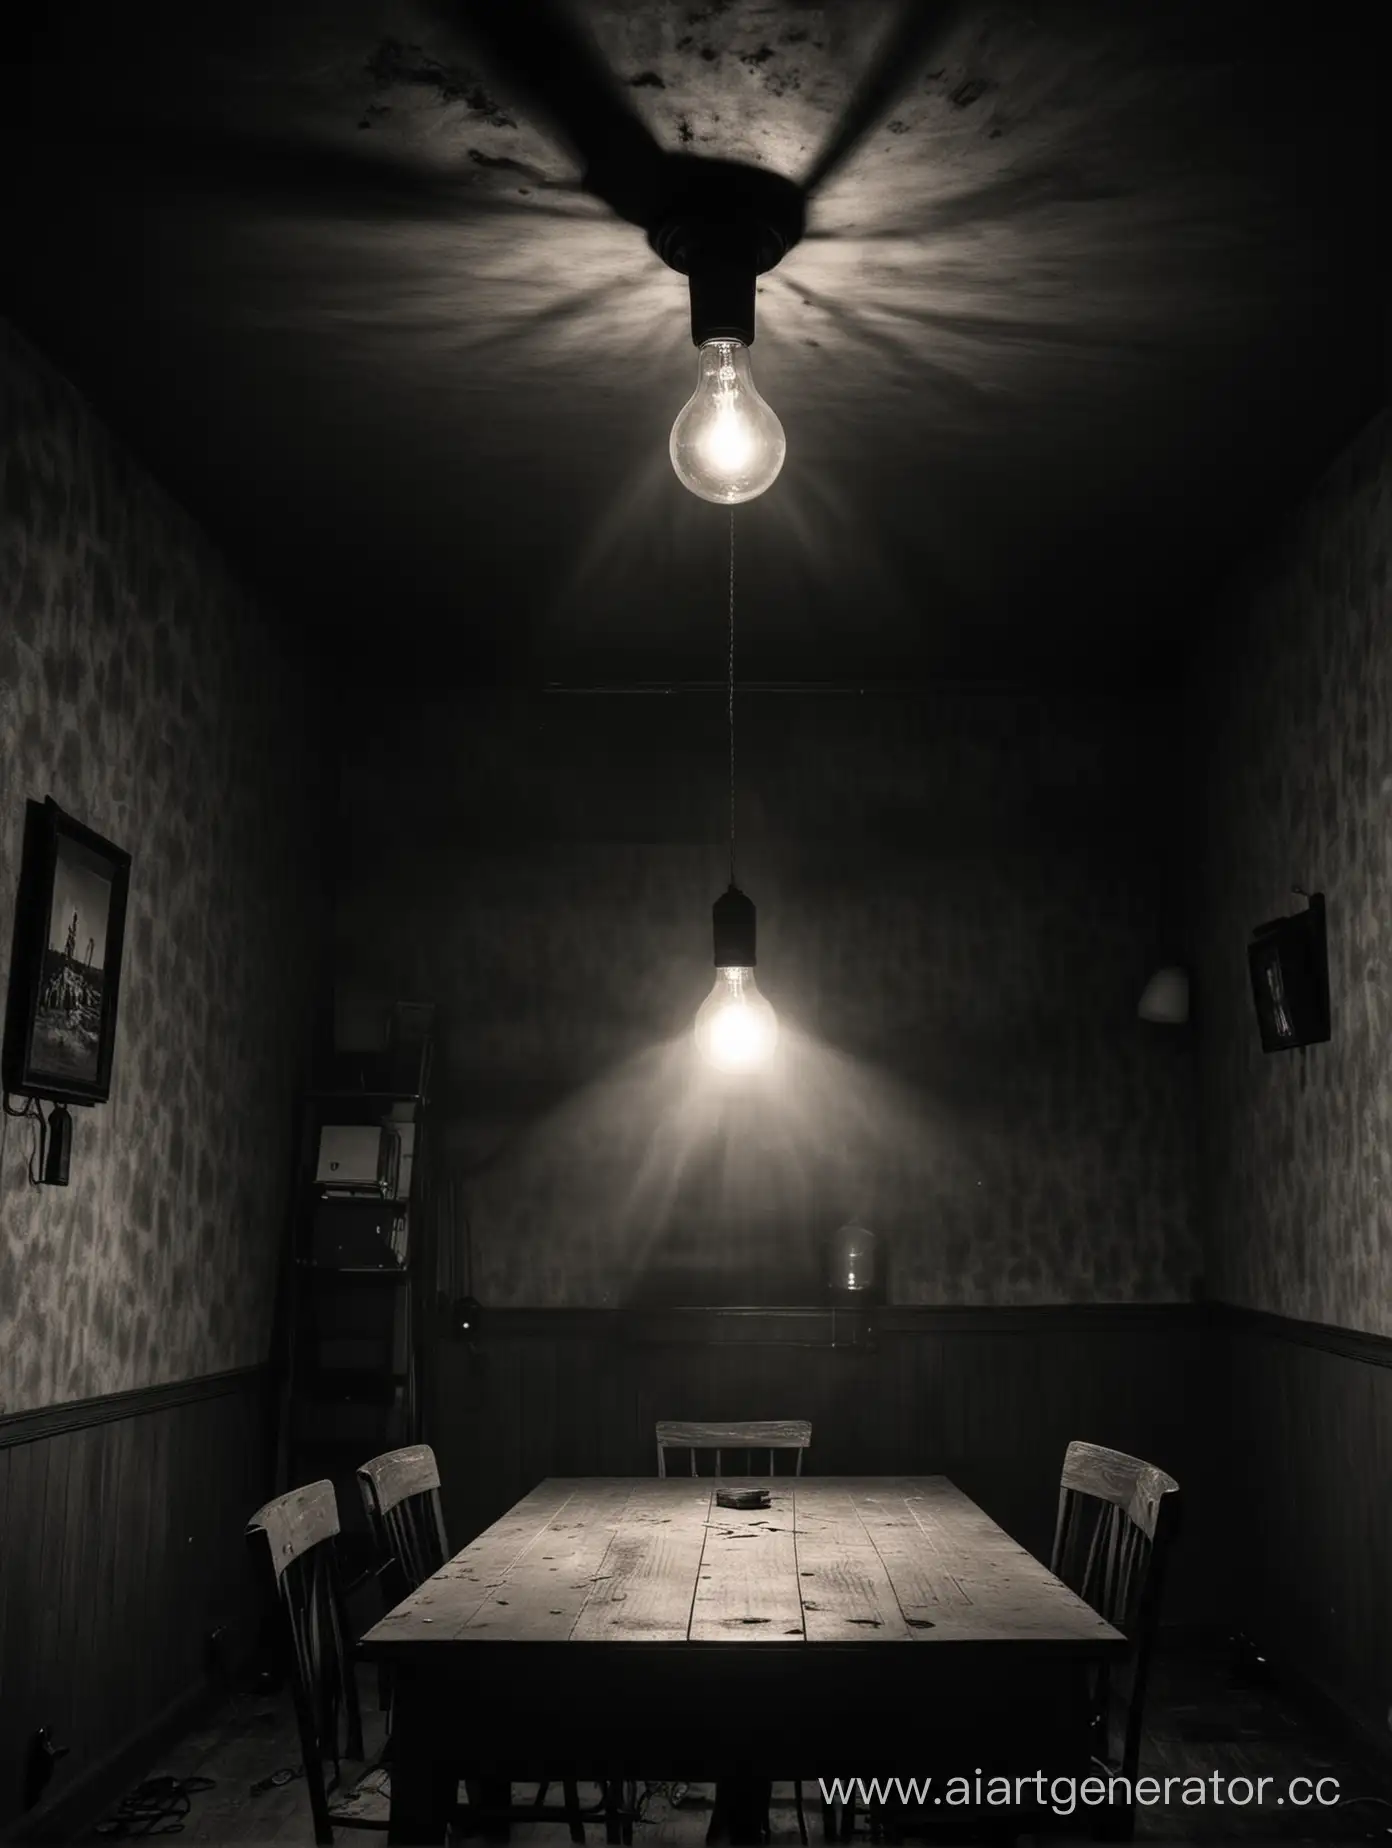 Dark-Room-with-Maniac-at-Table-Under-Ceiling-Light